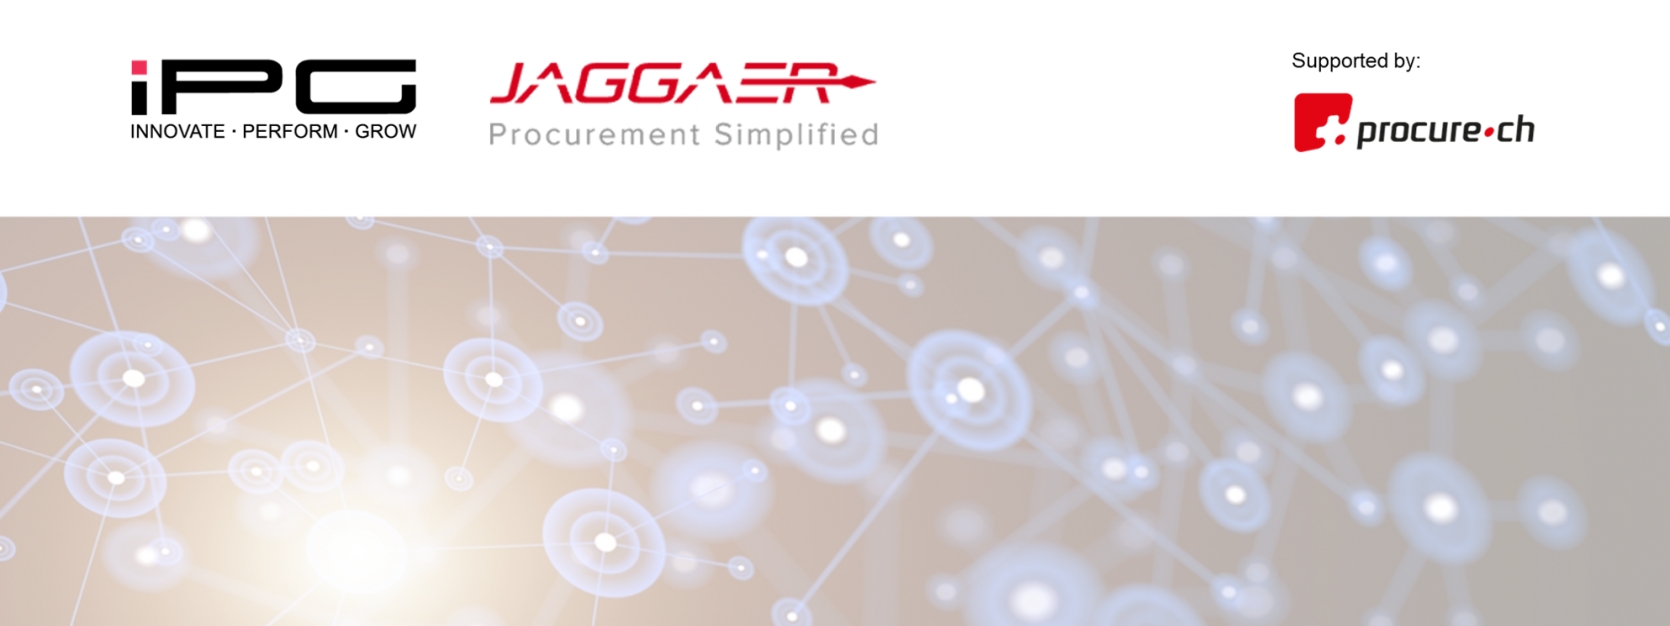 IPG AND JAGGAER LAUNCH PROCUREMENT PERFORMANCE EXCELLENCE SURVEY 2020